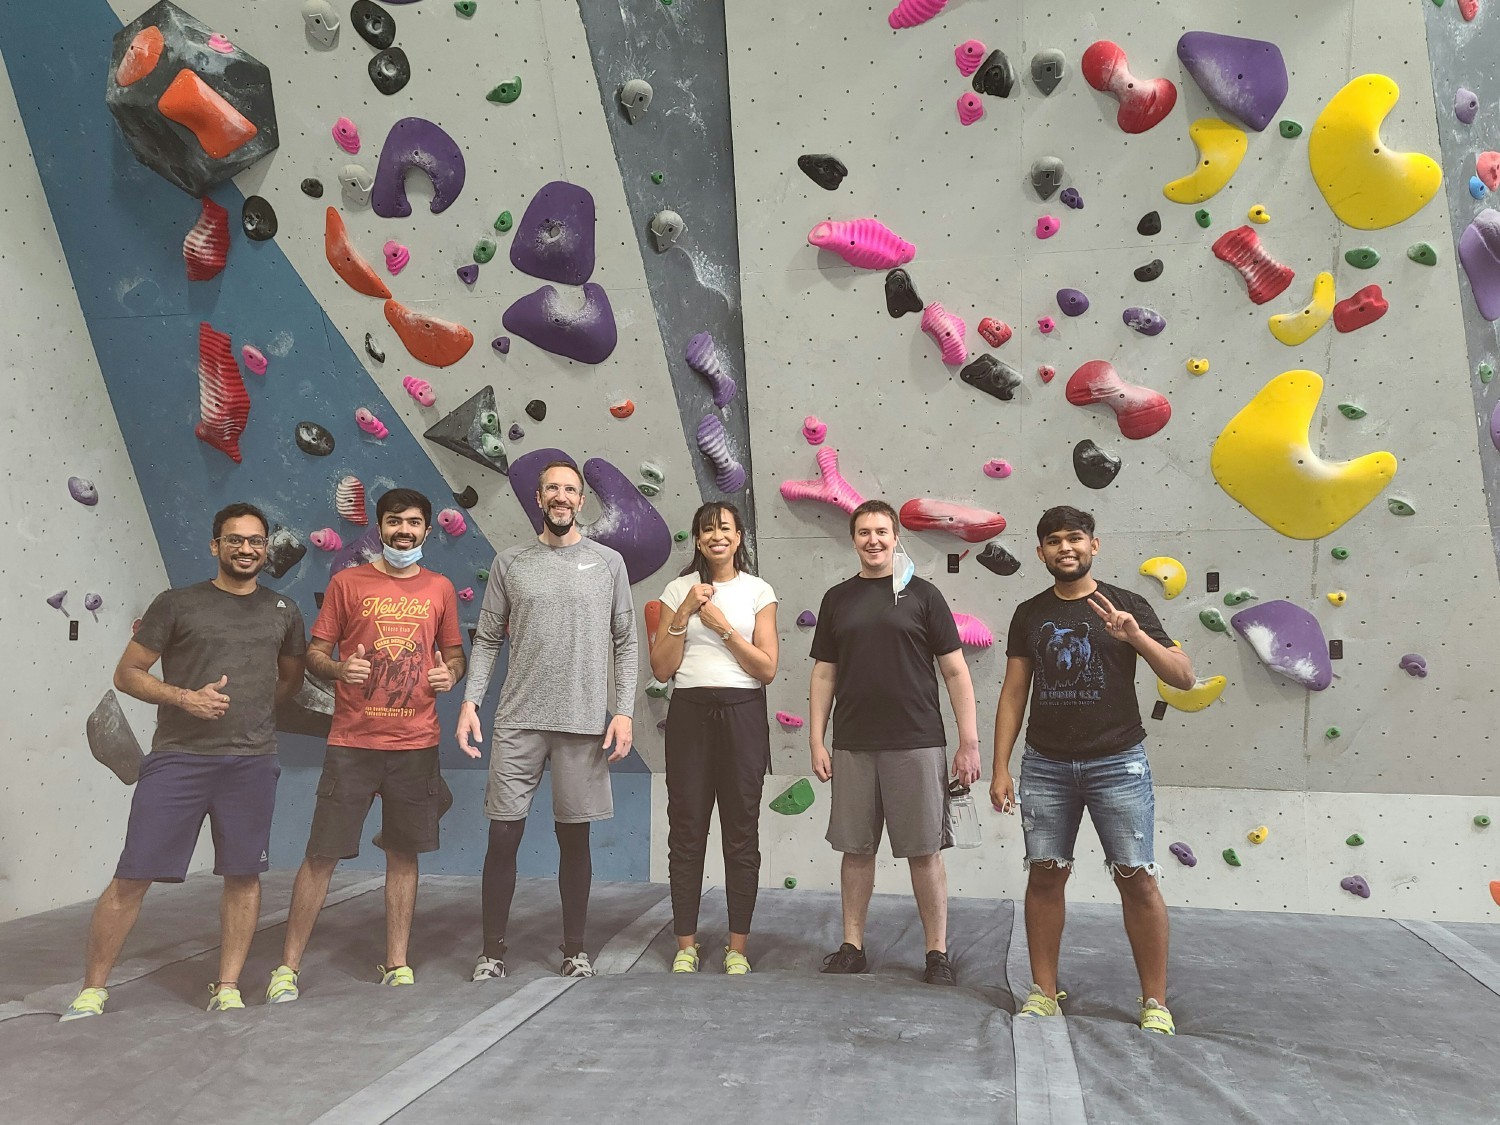 We love to get together outside of work and do activities.  There are fun climbing gyms in the city where we live.  